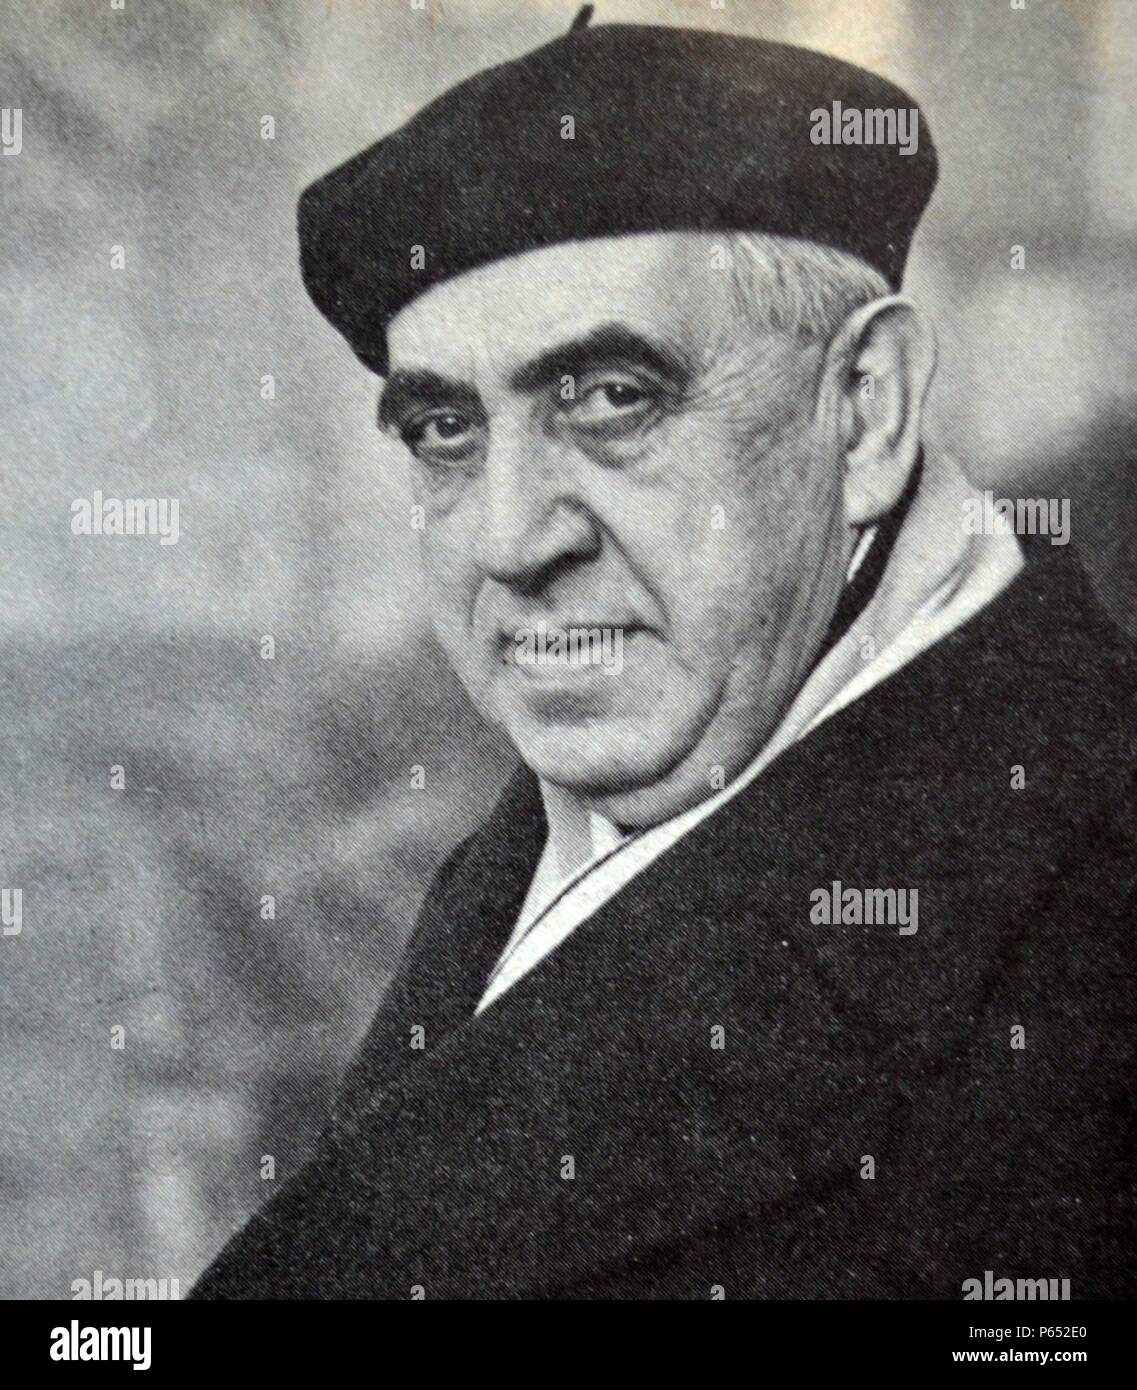 Ernst Rudolf Johannes Reuter (29 July 1889 – 29 September 1953) was the German mayor of West Berlin from 1948 to 1953, during the time of the Cold War Stock Photo